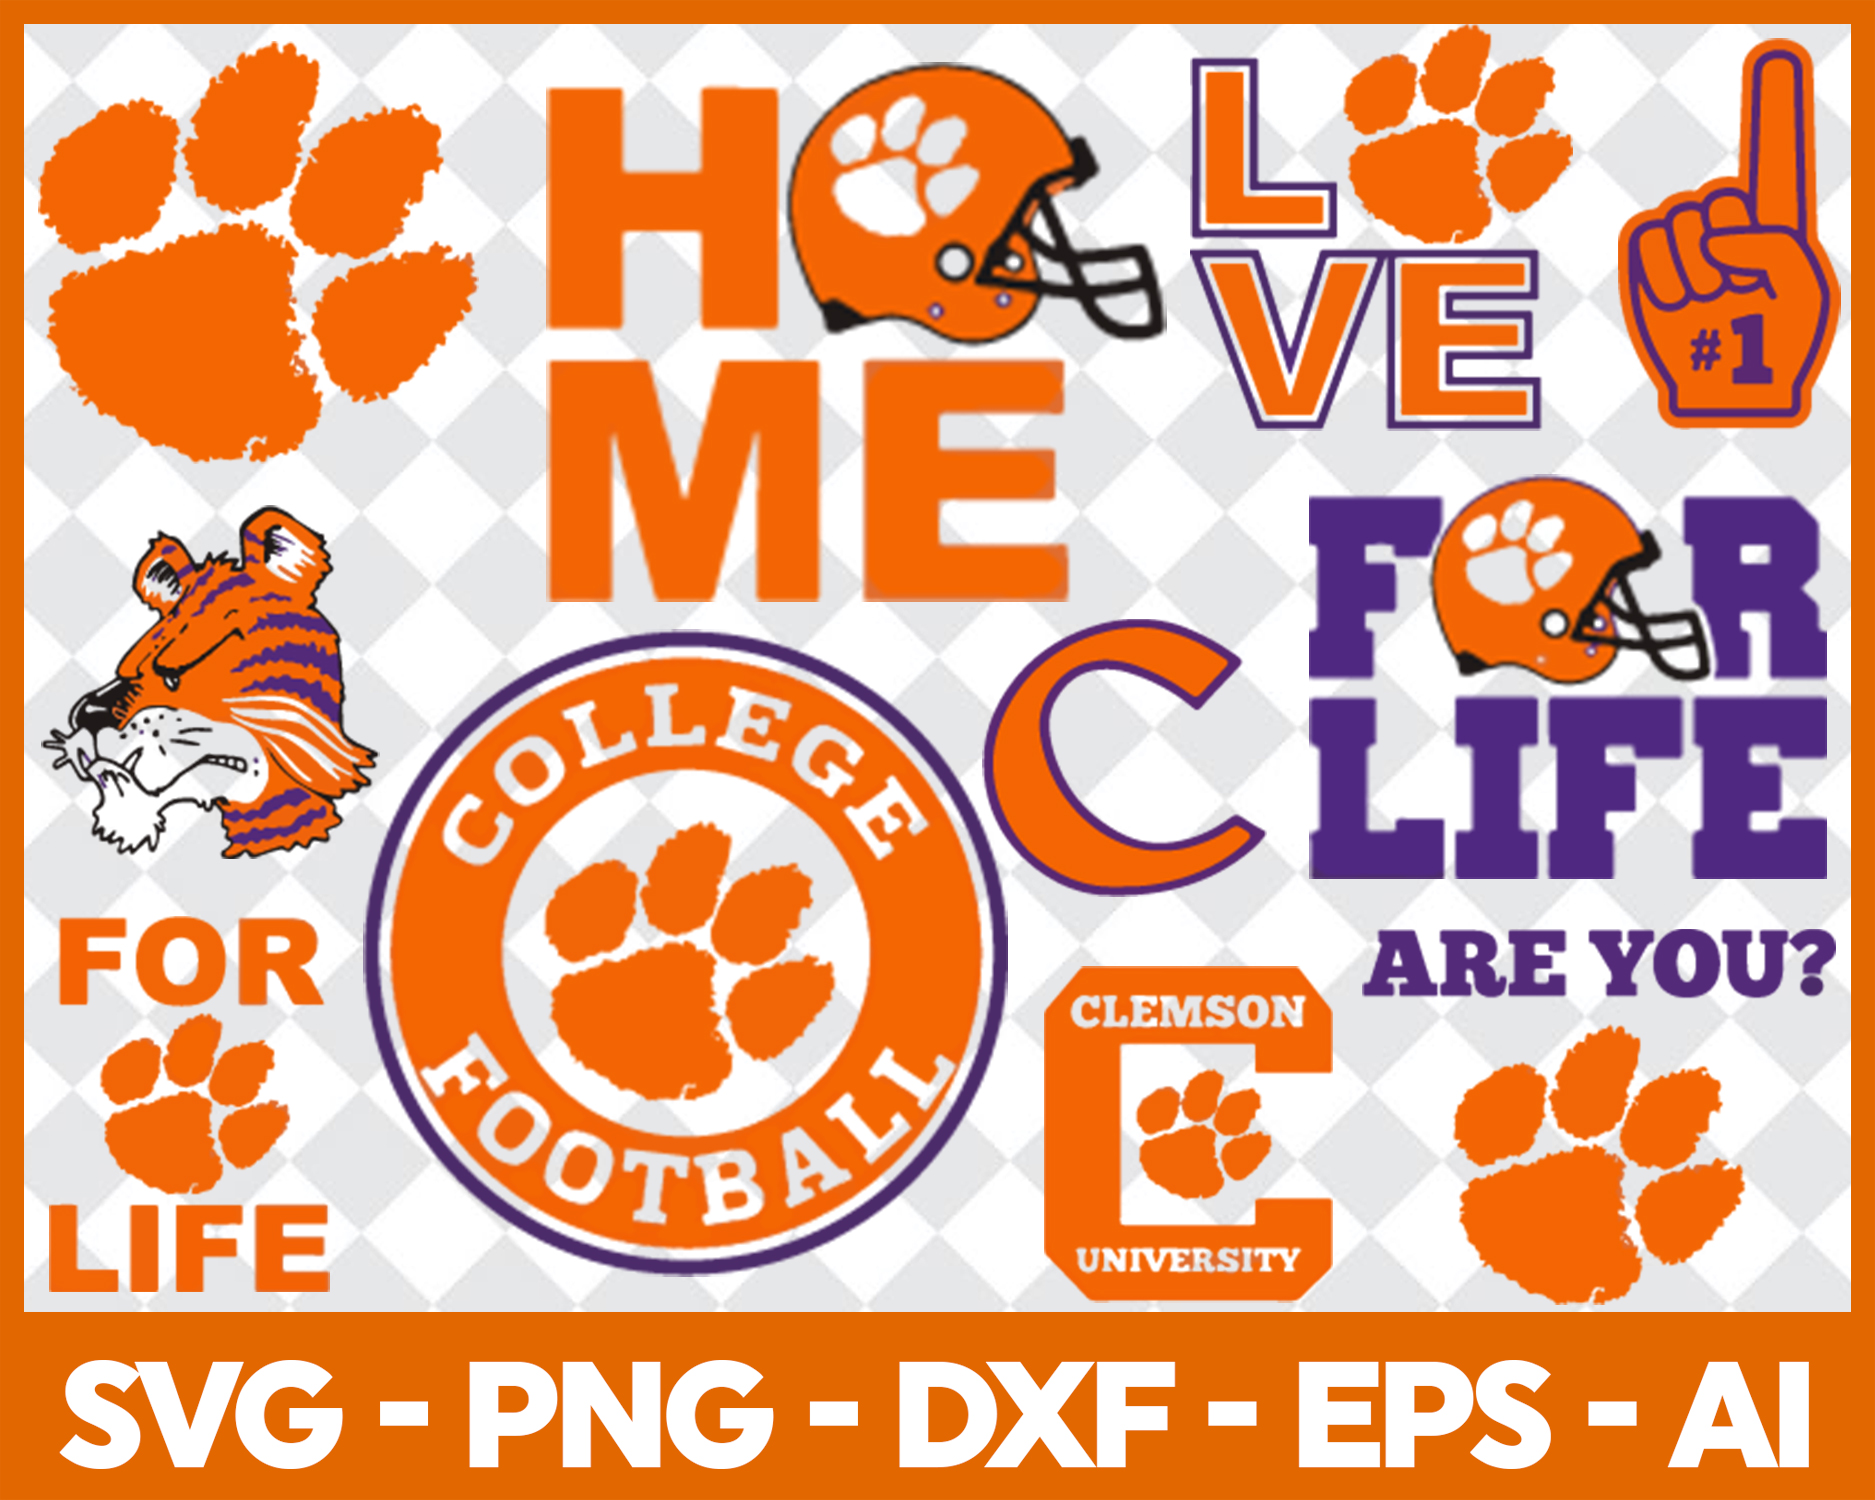 Clemson Tigers SVG,SVG Files For Silhouette, Files For Cricut, SVG, DXF